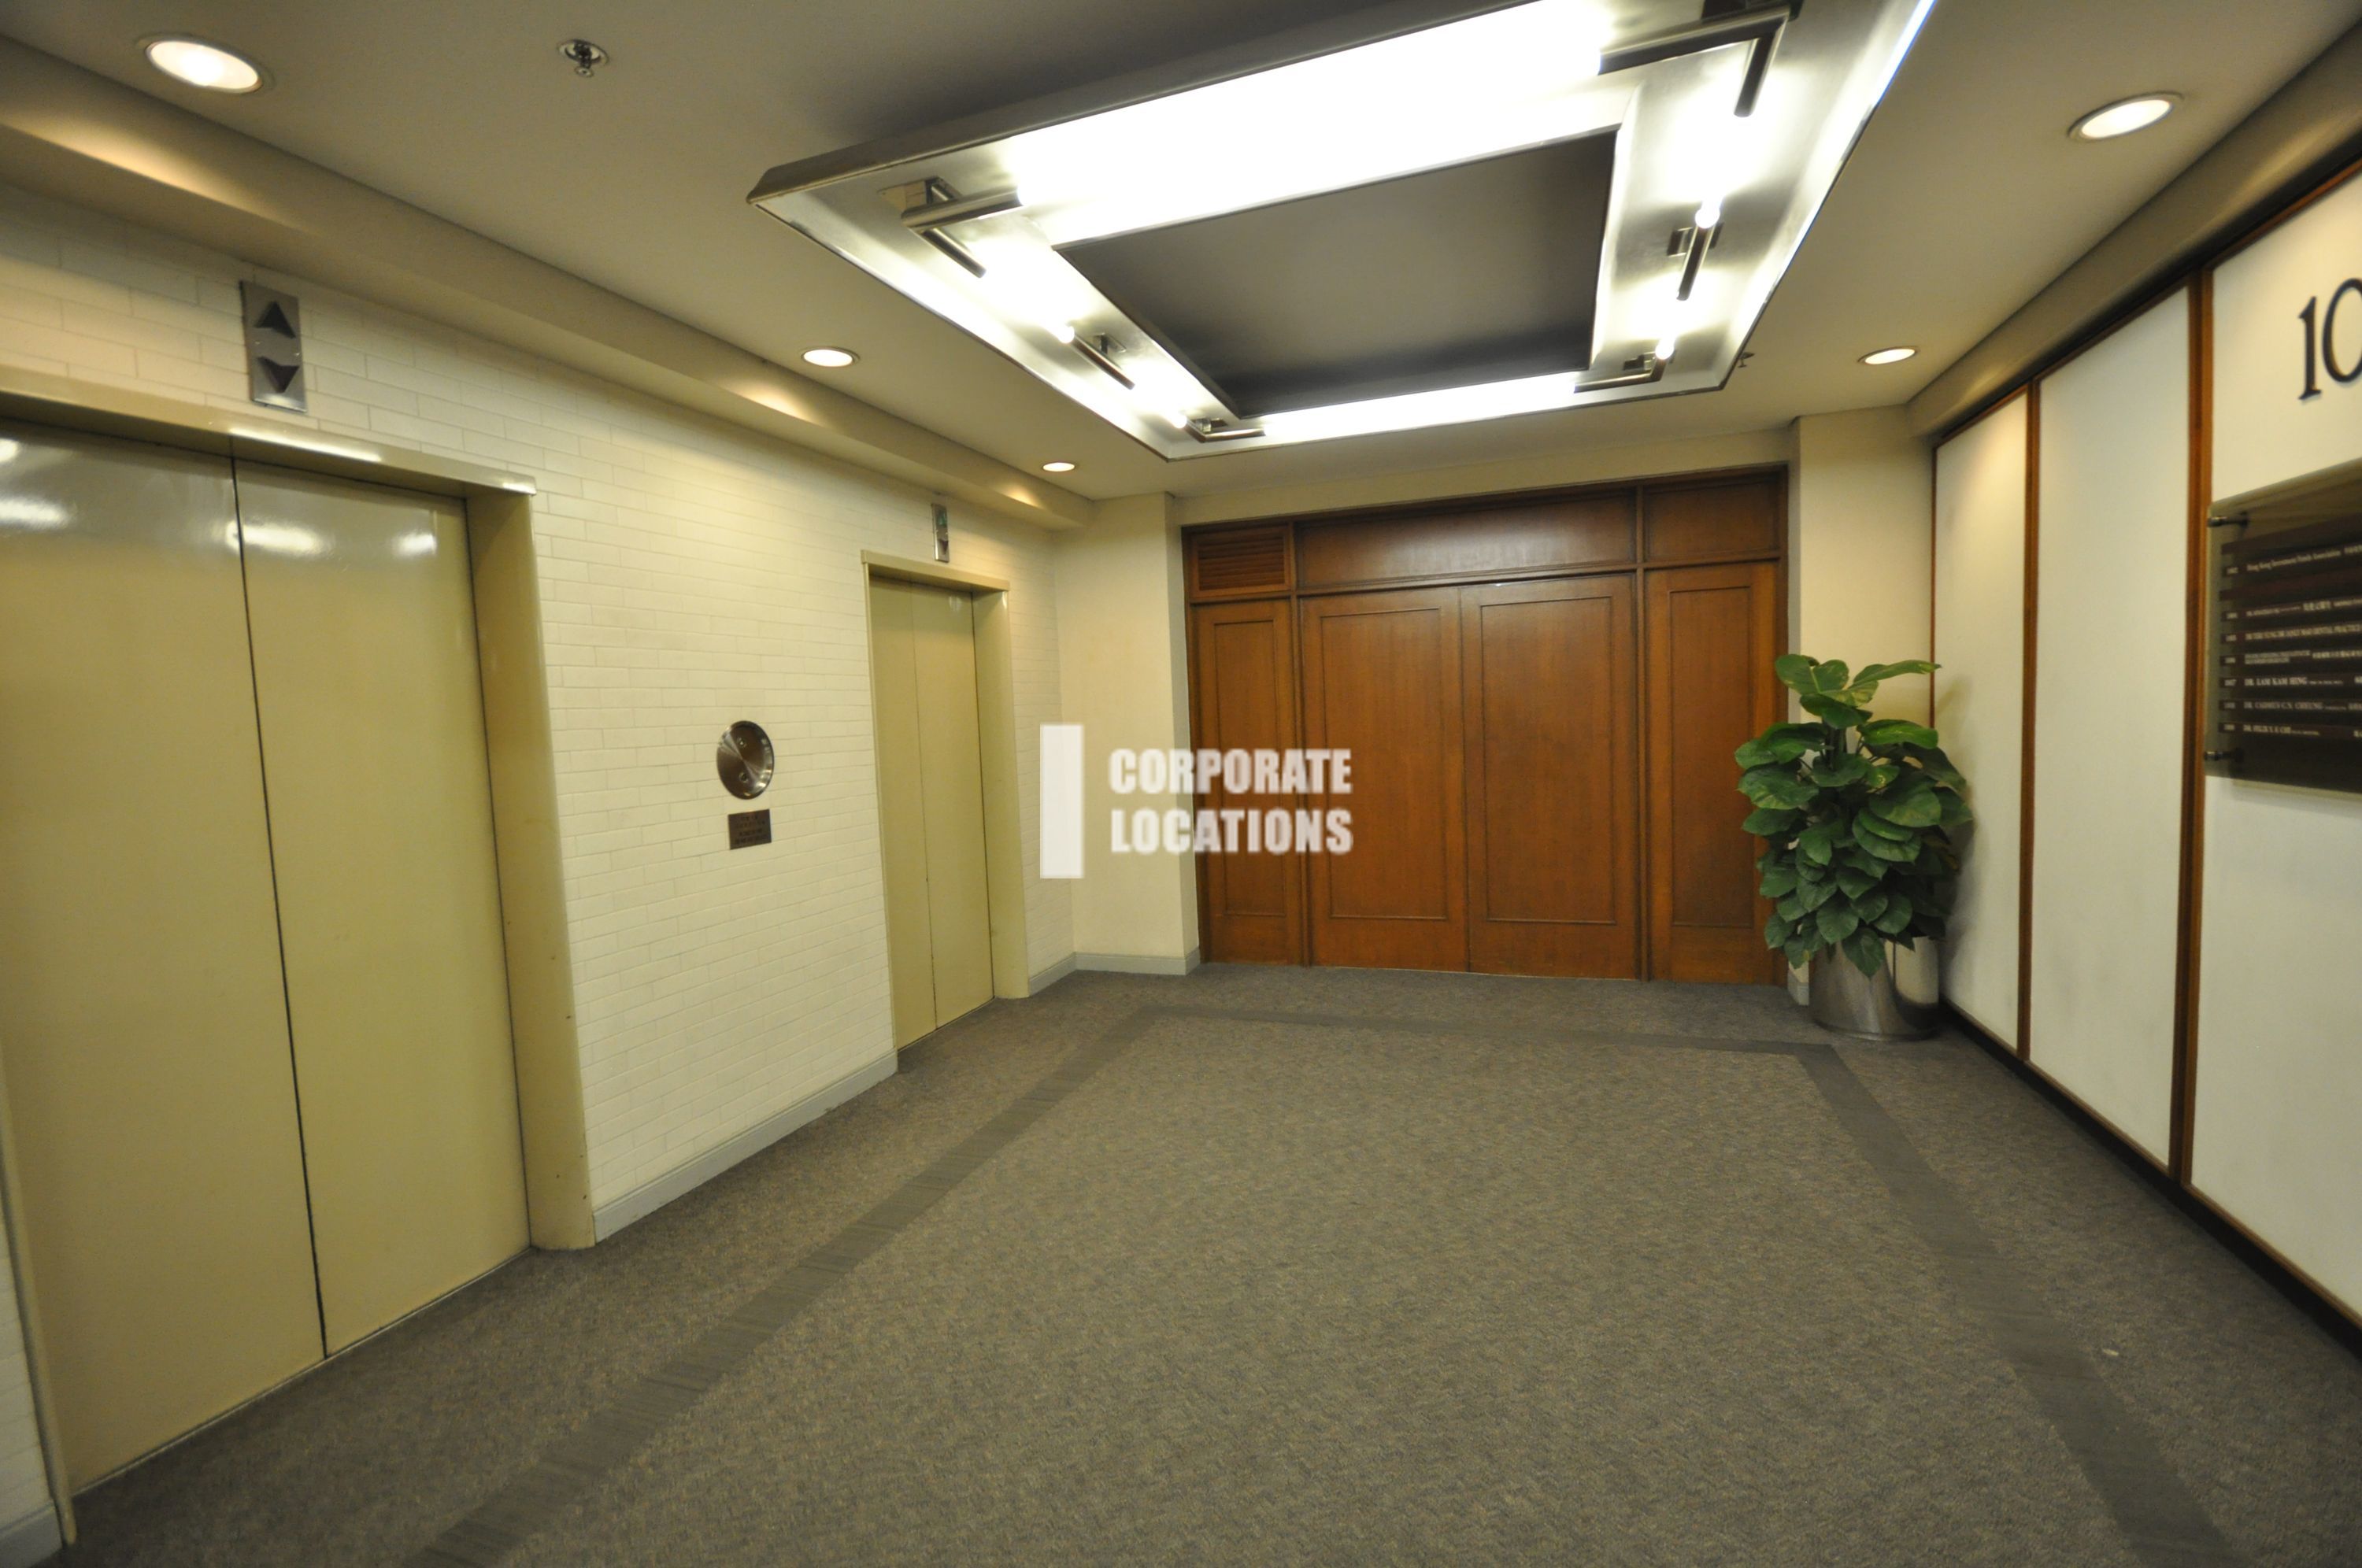 Lease offices in Tak Shing House - Central